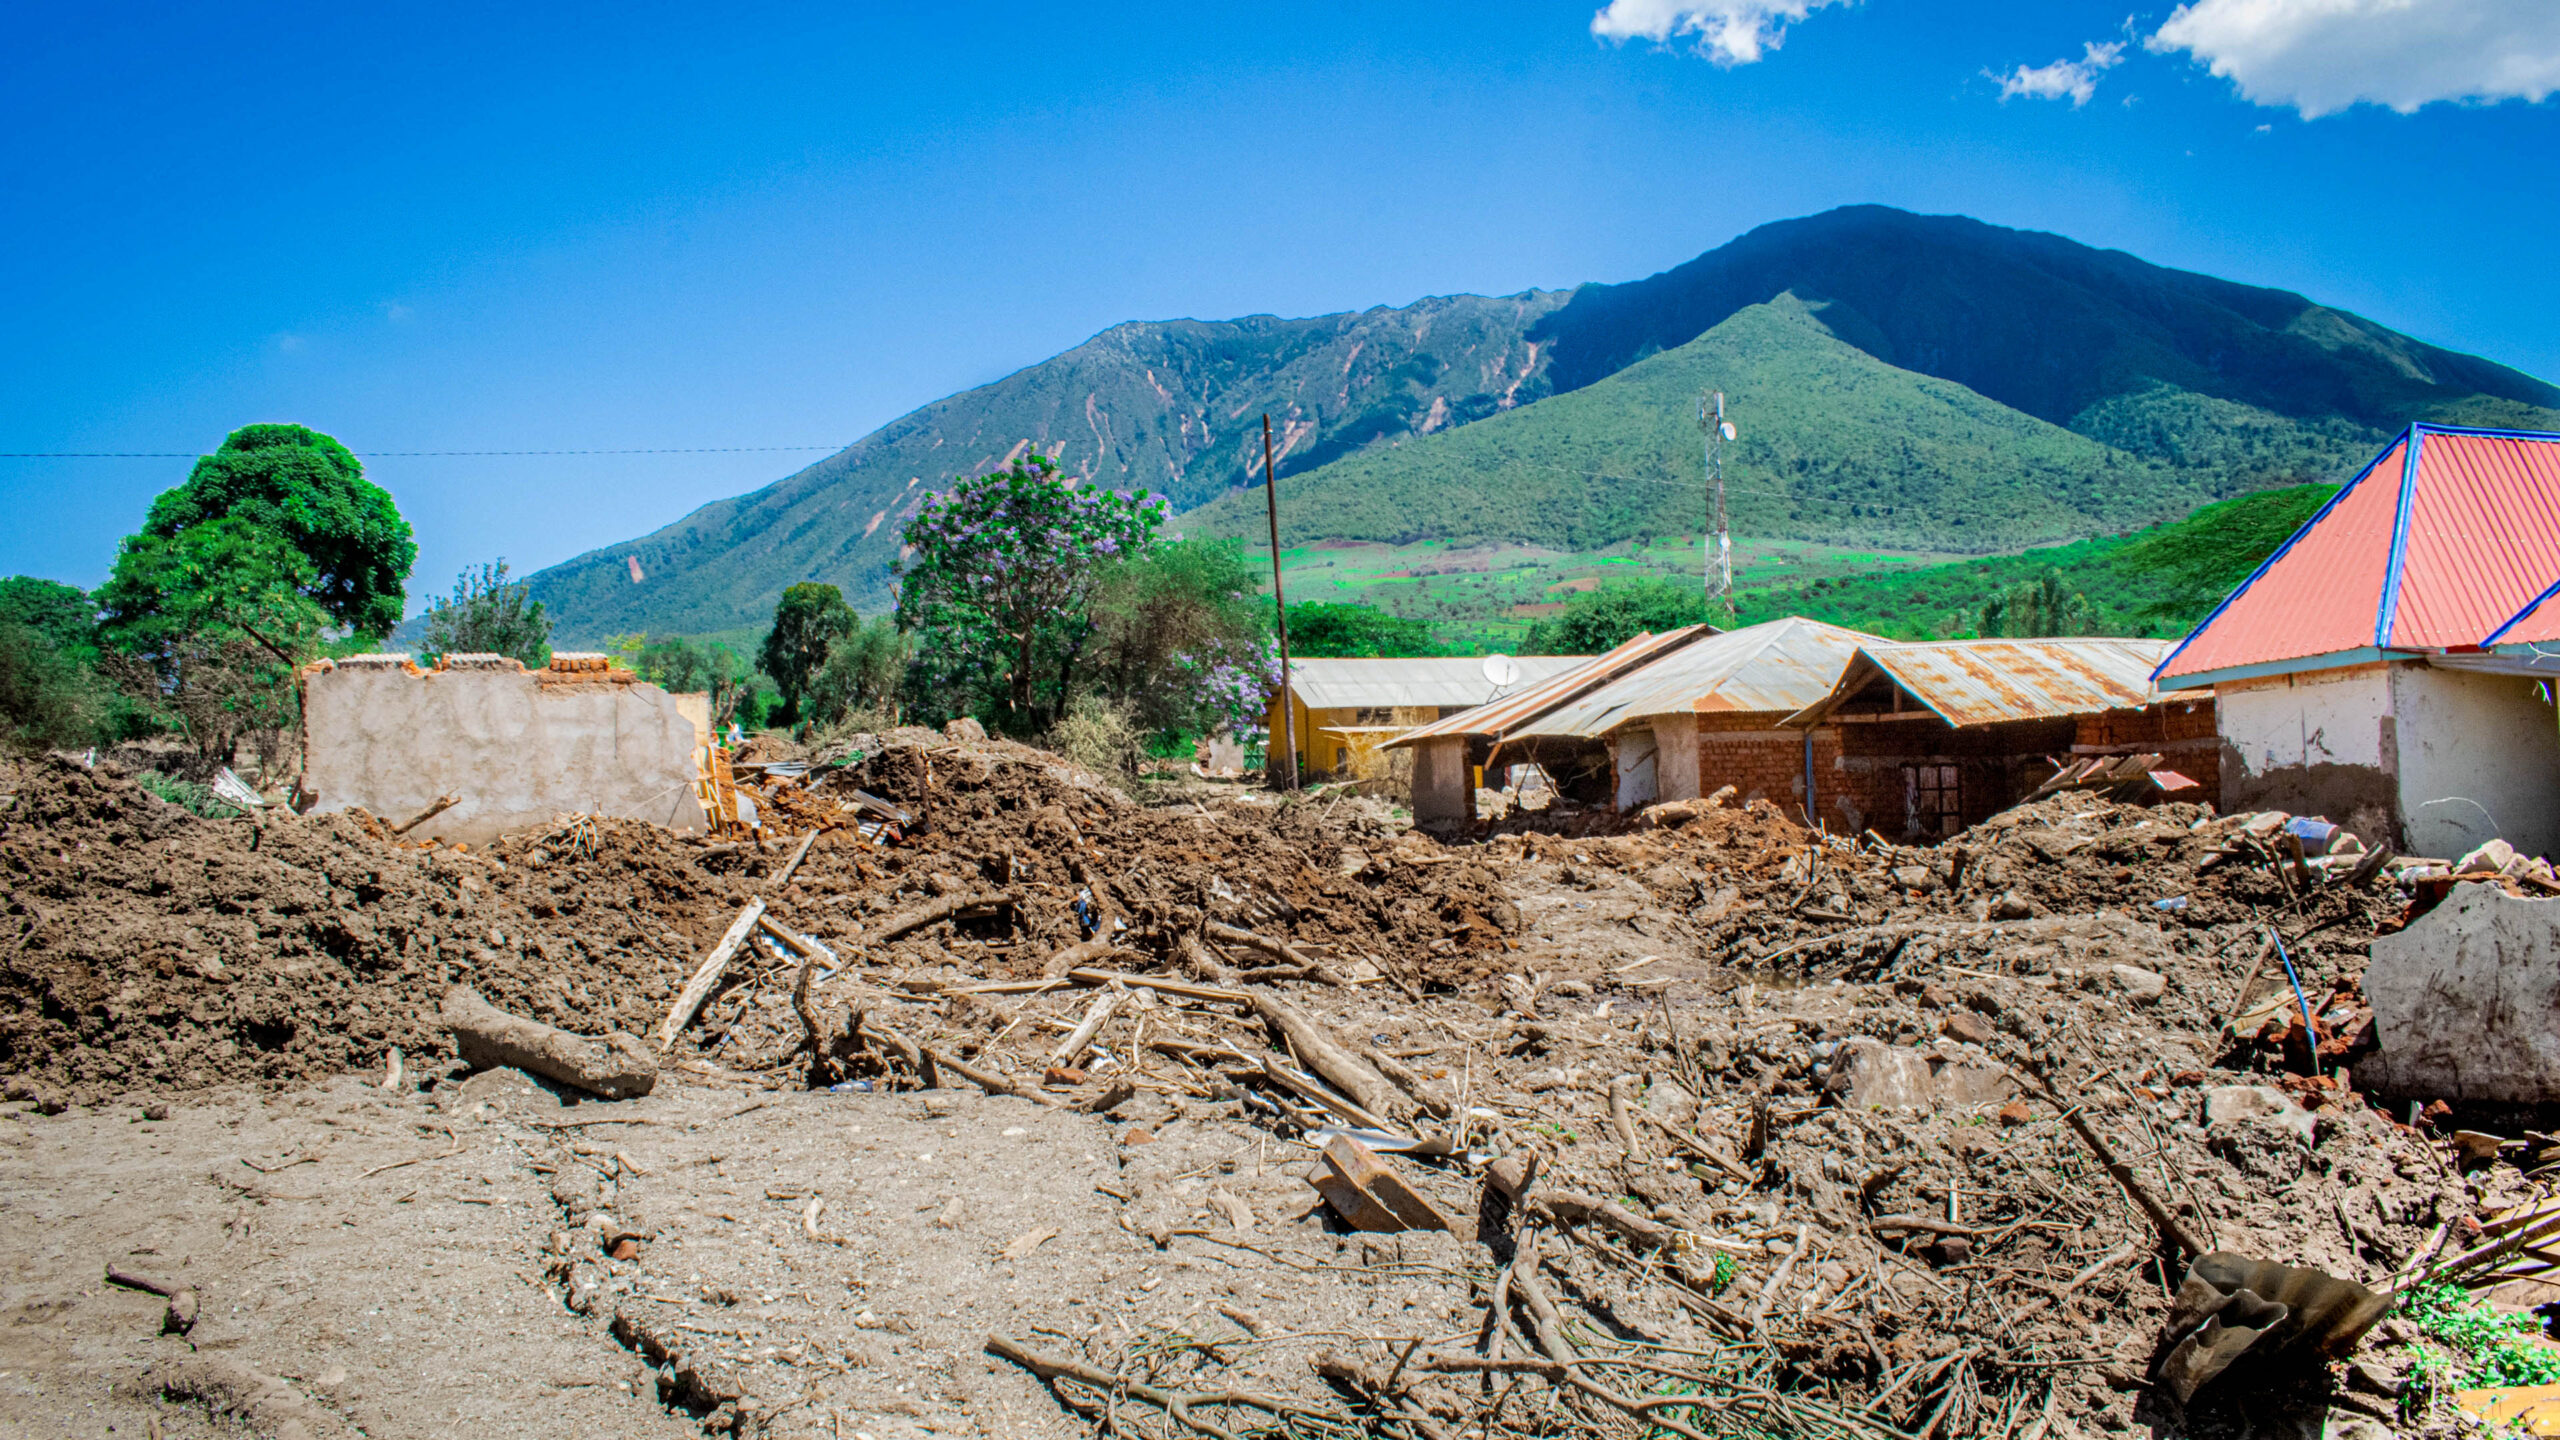 Rubble piled up by buildings shows the environmental destruction following deadly landslides in the Manyara region of Tanzania in December 2023. Photo courtesy of Amref Health Africa in Tanzania